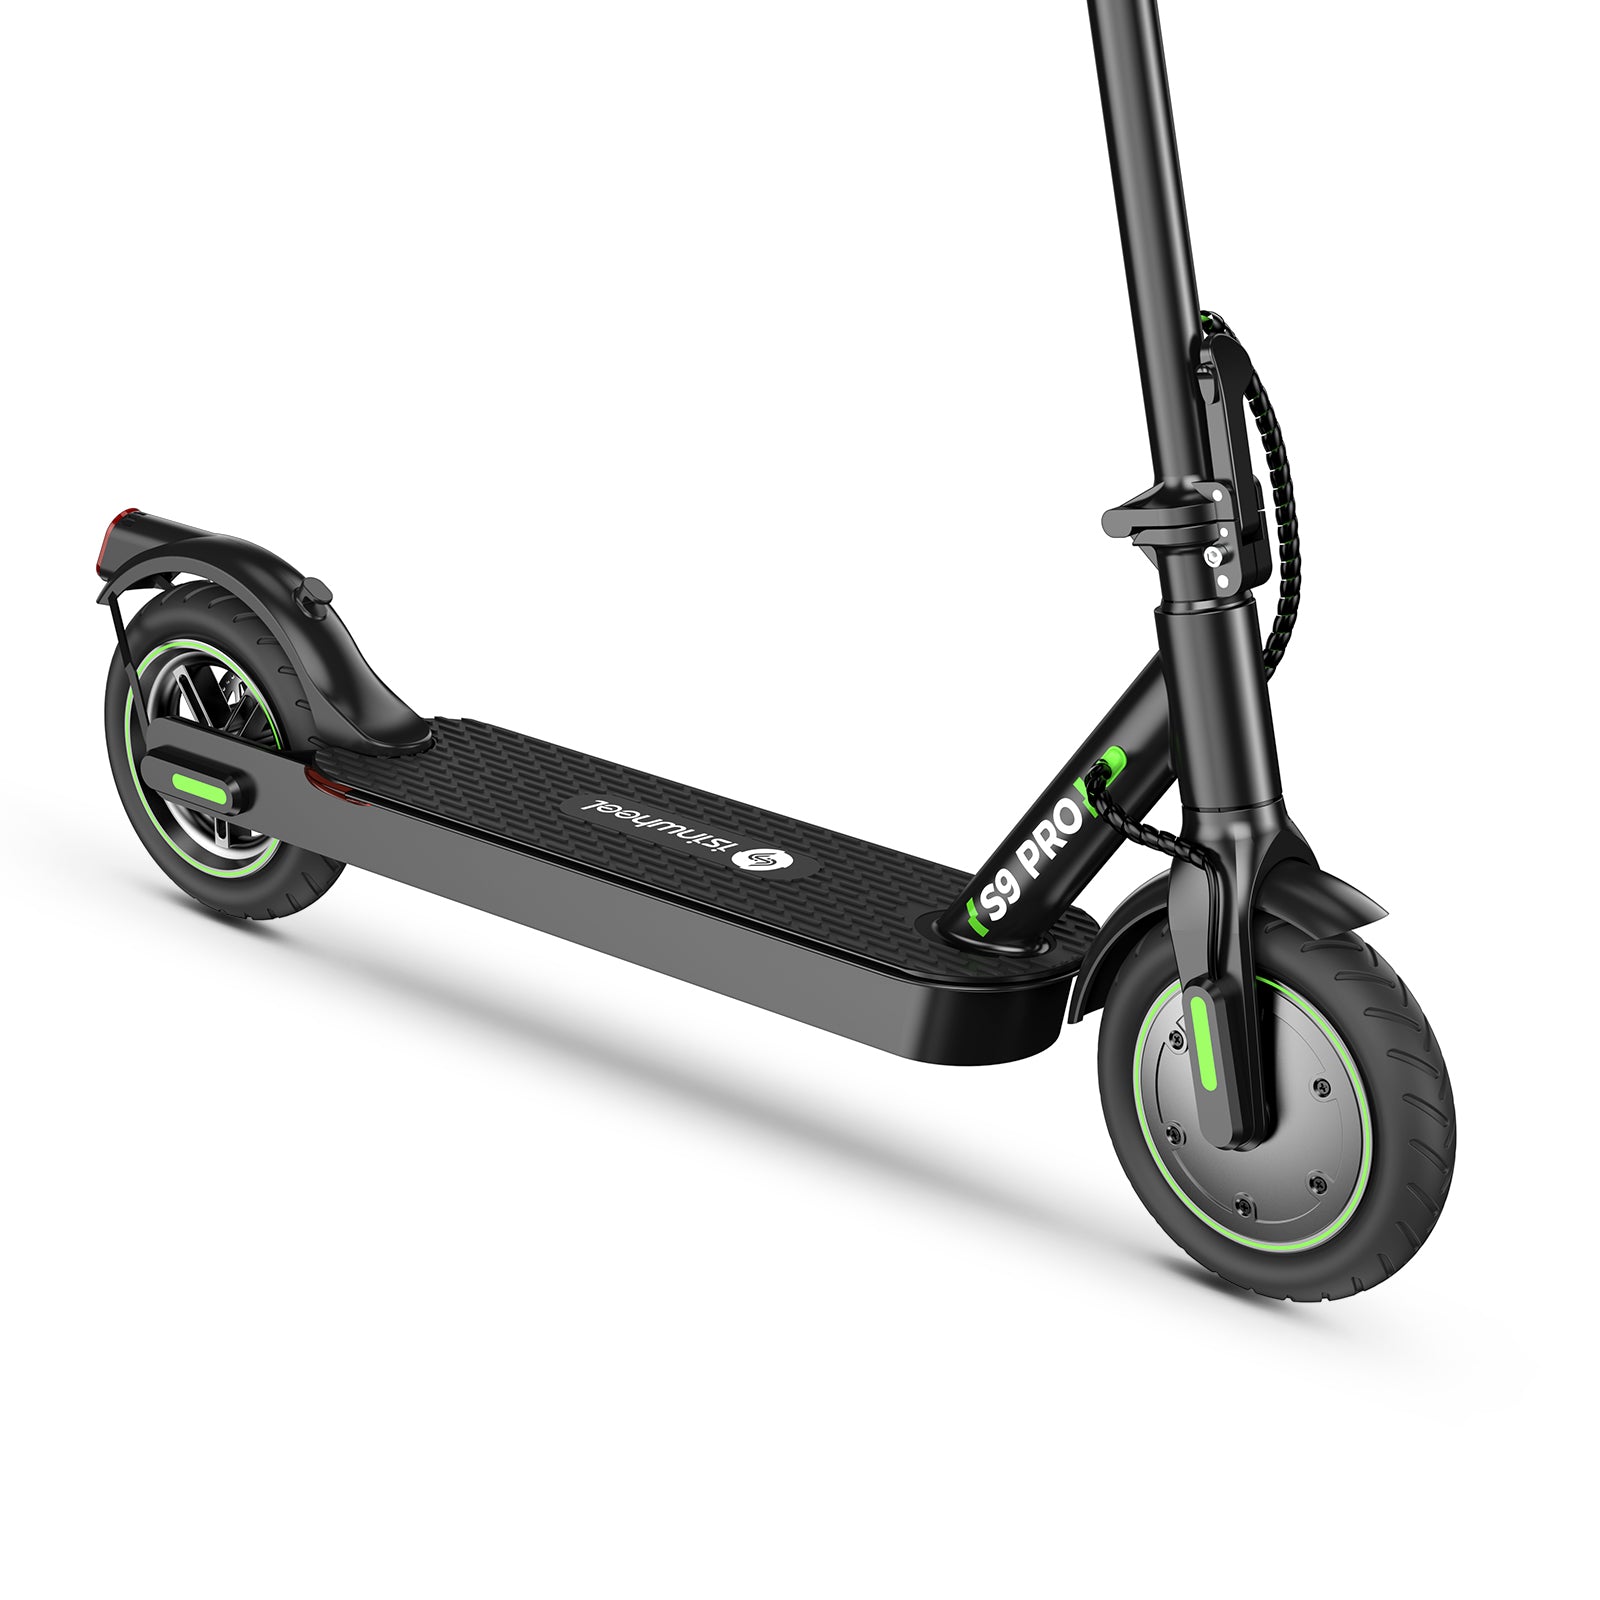 isinwheel S9 Pro Pneumatic Tire Electric Scooter Details 1